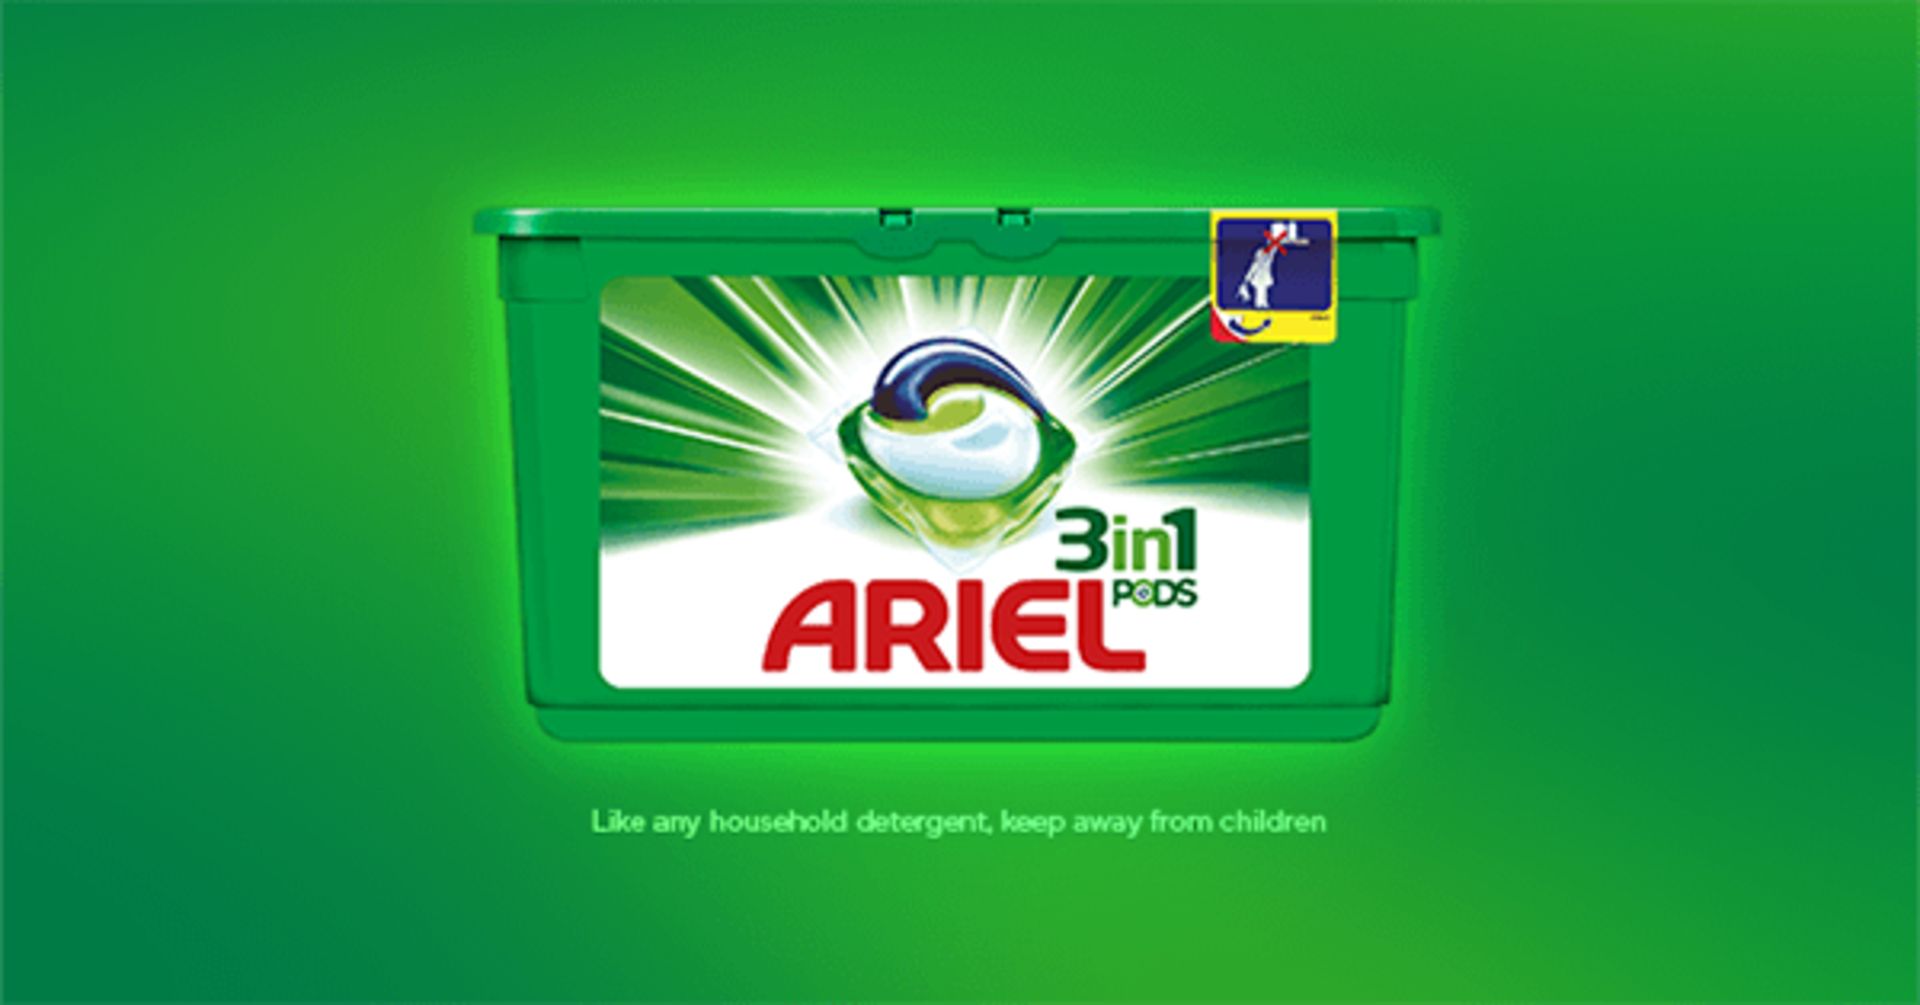 V Brand New Ariel 3 in 1 Pods 26 Pack - Cleans - Lifts Stains - Brightens